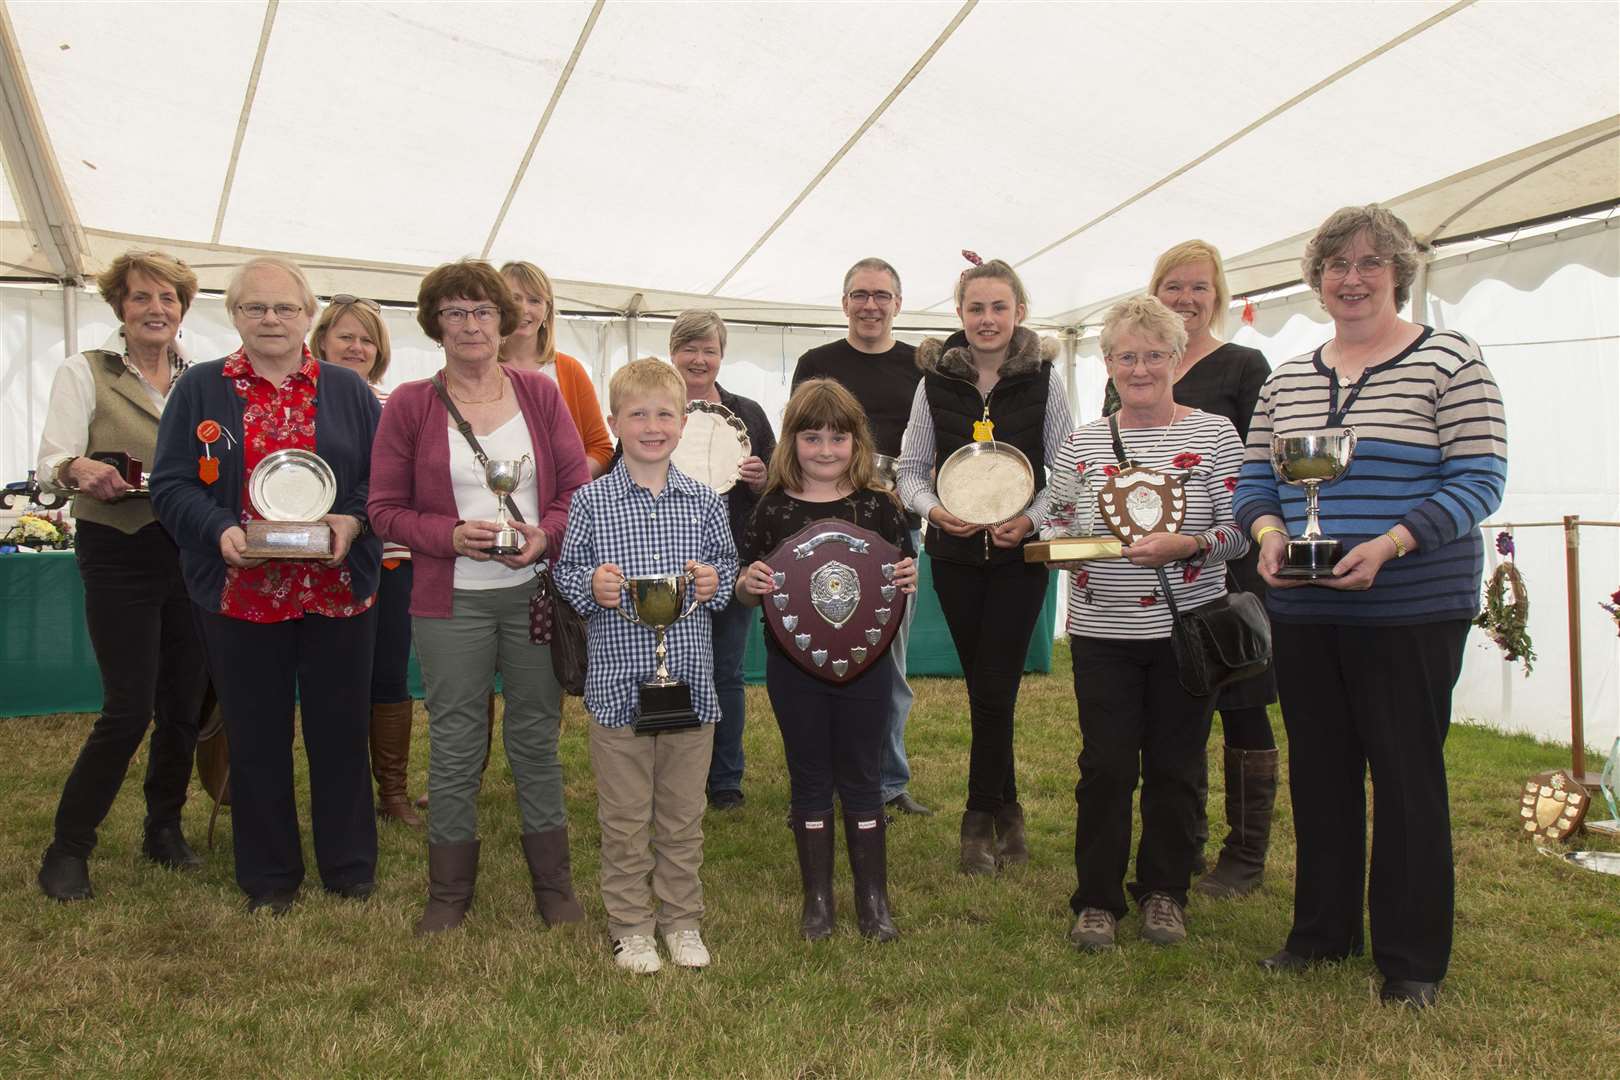 Some of the flower show trophy winners along with Caithness Agricultural Society president Elaine Miller (back, right). Picture: Ann-Marie Jones / Northern Studios